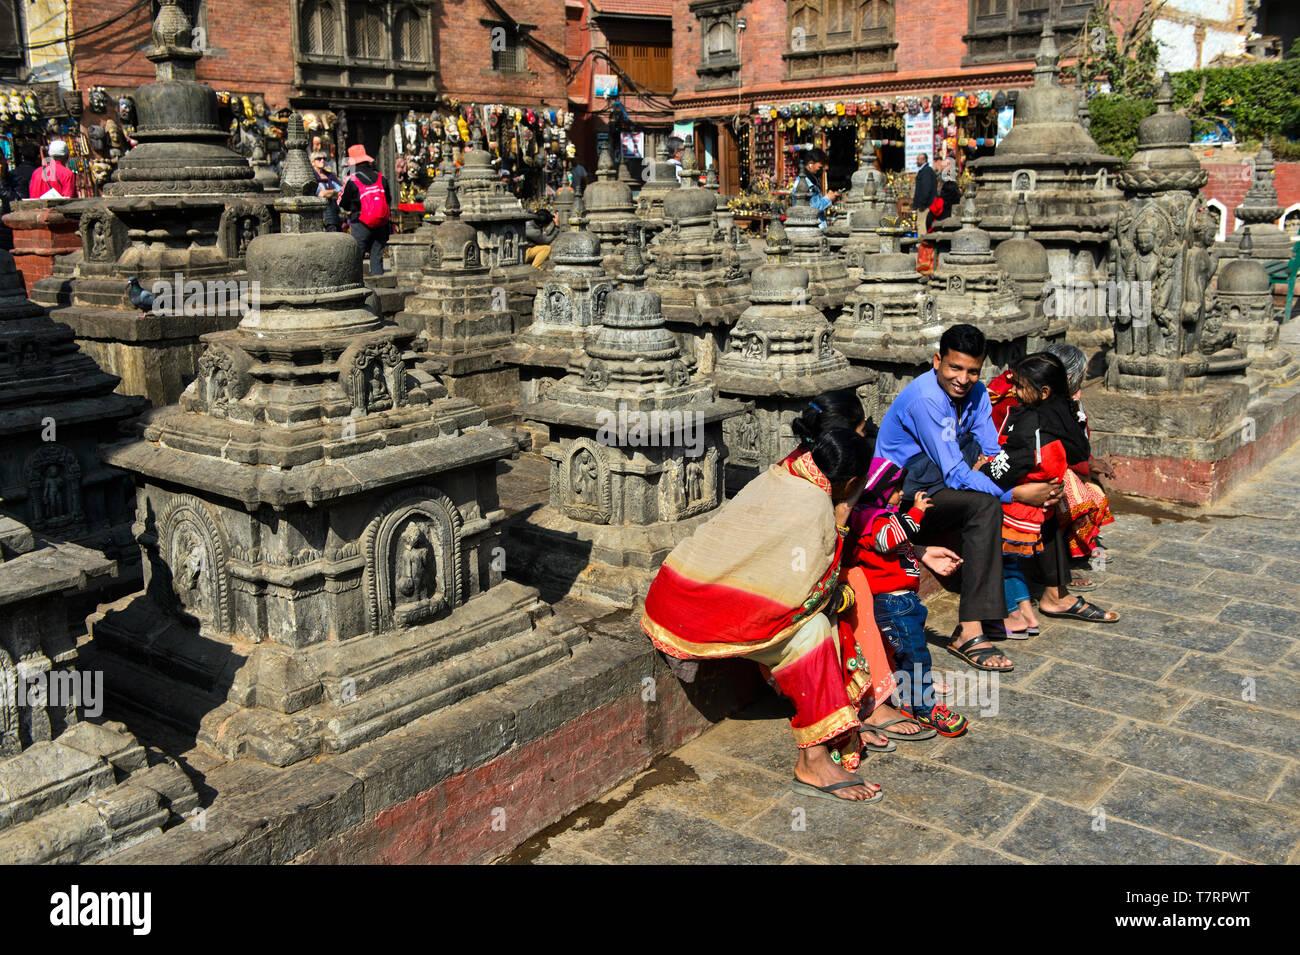 Local family in colorful dresses resting on a square with stupas on the site of the Swayambhunath temple or Monkey Temple, Kathmandu, Nepal Stock Photo